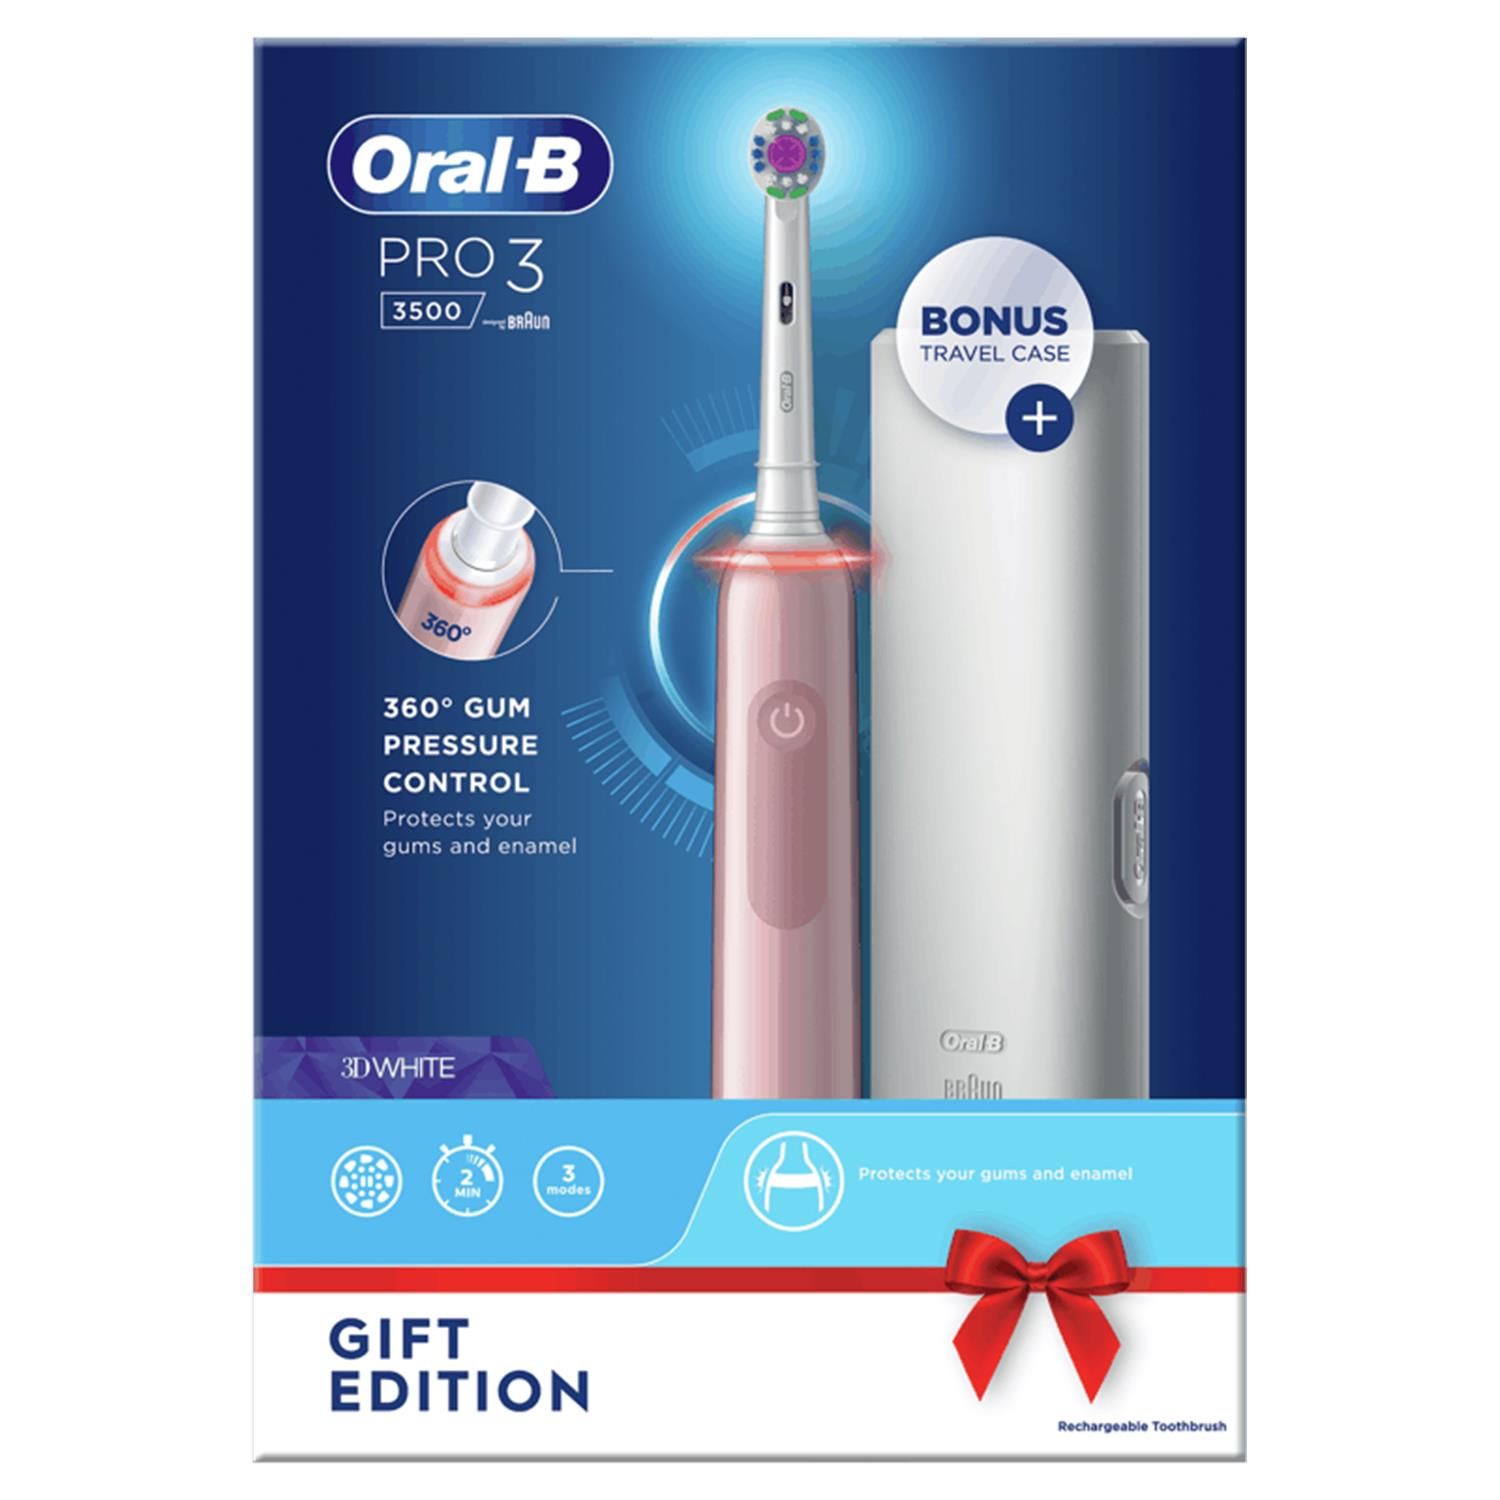 Oral-B Pro 3 3500 Electric Toothbrush with Smart Sensor Cross Action, Pink

Experience Oral-B Pro 3 from the #1 brand used by dentists worldwide. The sleek handle of the Pro 3 electric toothbrush helps you brush like your dentist recommends: It helps you brush for 2 minutes with the professional timer and it notifies you every 30 seconds to change the area you are brushing. 

While you are just moving the brush around your mouth, Oral-B's unique round head does all the rest. It removes up to 100% more plaque than a standard manual toothbrush for healthier gums and it starts making your smile whiter as of the first day of brushing by removing surface stains. 

Not only this, but the toothbrush helps you protect your delicate gums with the 360 ÌŠgum pressure control technology that reduces brushing speed and alerts you to be gentler if you brush too hard. Oral-B Pro 3 is the must-have brush for everyone who wants to switch to an electric toothbrush and improve their oral health.

For a Clean that Wow: remove bacteria by removing up to 100% more plaque vs. a manual toothbrush
Deep Cleaning & Healthier Gums: With 360 ÌŠ Gum Pressure Control that visibly alerts you if you brush too hard
3 Brushing Mode: Daily clean, whitening and sensitive

Features:
Battery lasts more than 2 weeks with 1 charge with the Lithium-ION battery
Helps you brush like your dentist recommends
Helps you brush longer with the 2 minutes embedded timer
It removes up to 100% more plaque than a standard manual toothbrush
An ideal gift set 

Package Includes: 1x Oral-B Pro 3 Electric Toothbrush with Smart Pressure Sensor, 3500, Pink